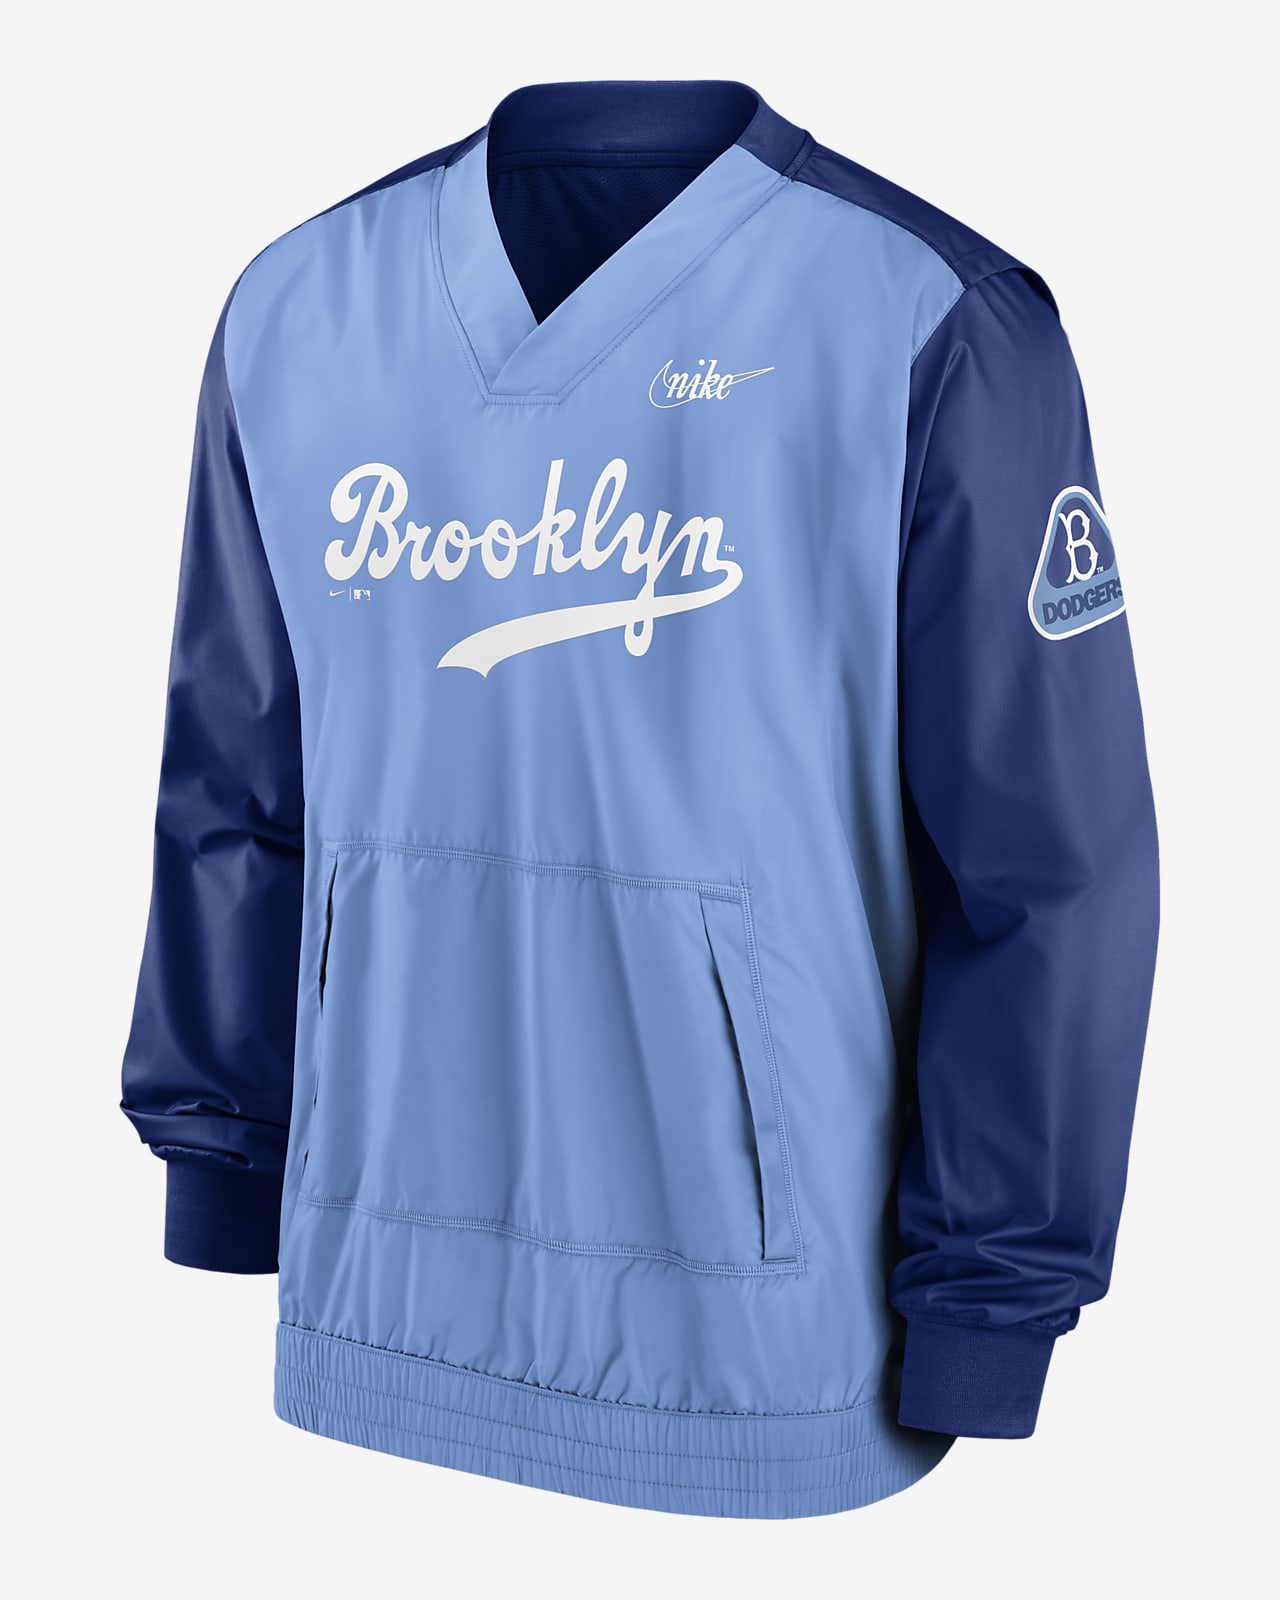 Nike Cooperstown (MLB Brooklyn Dodgers) Men's Pullover Jacket